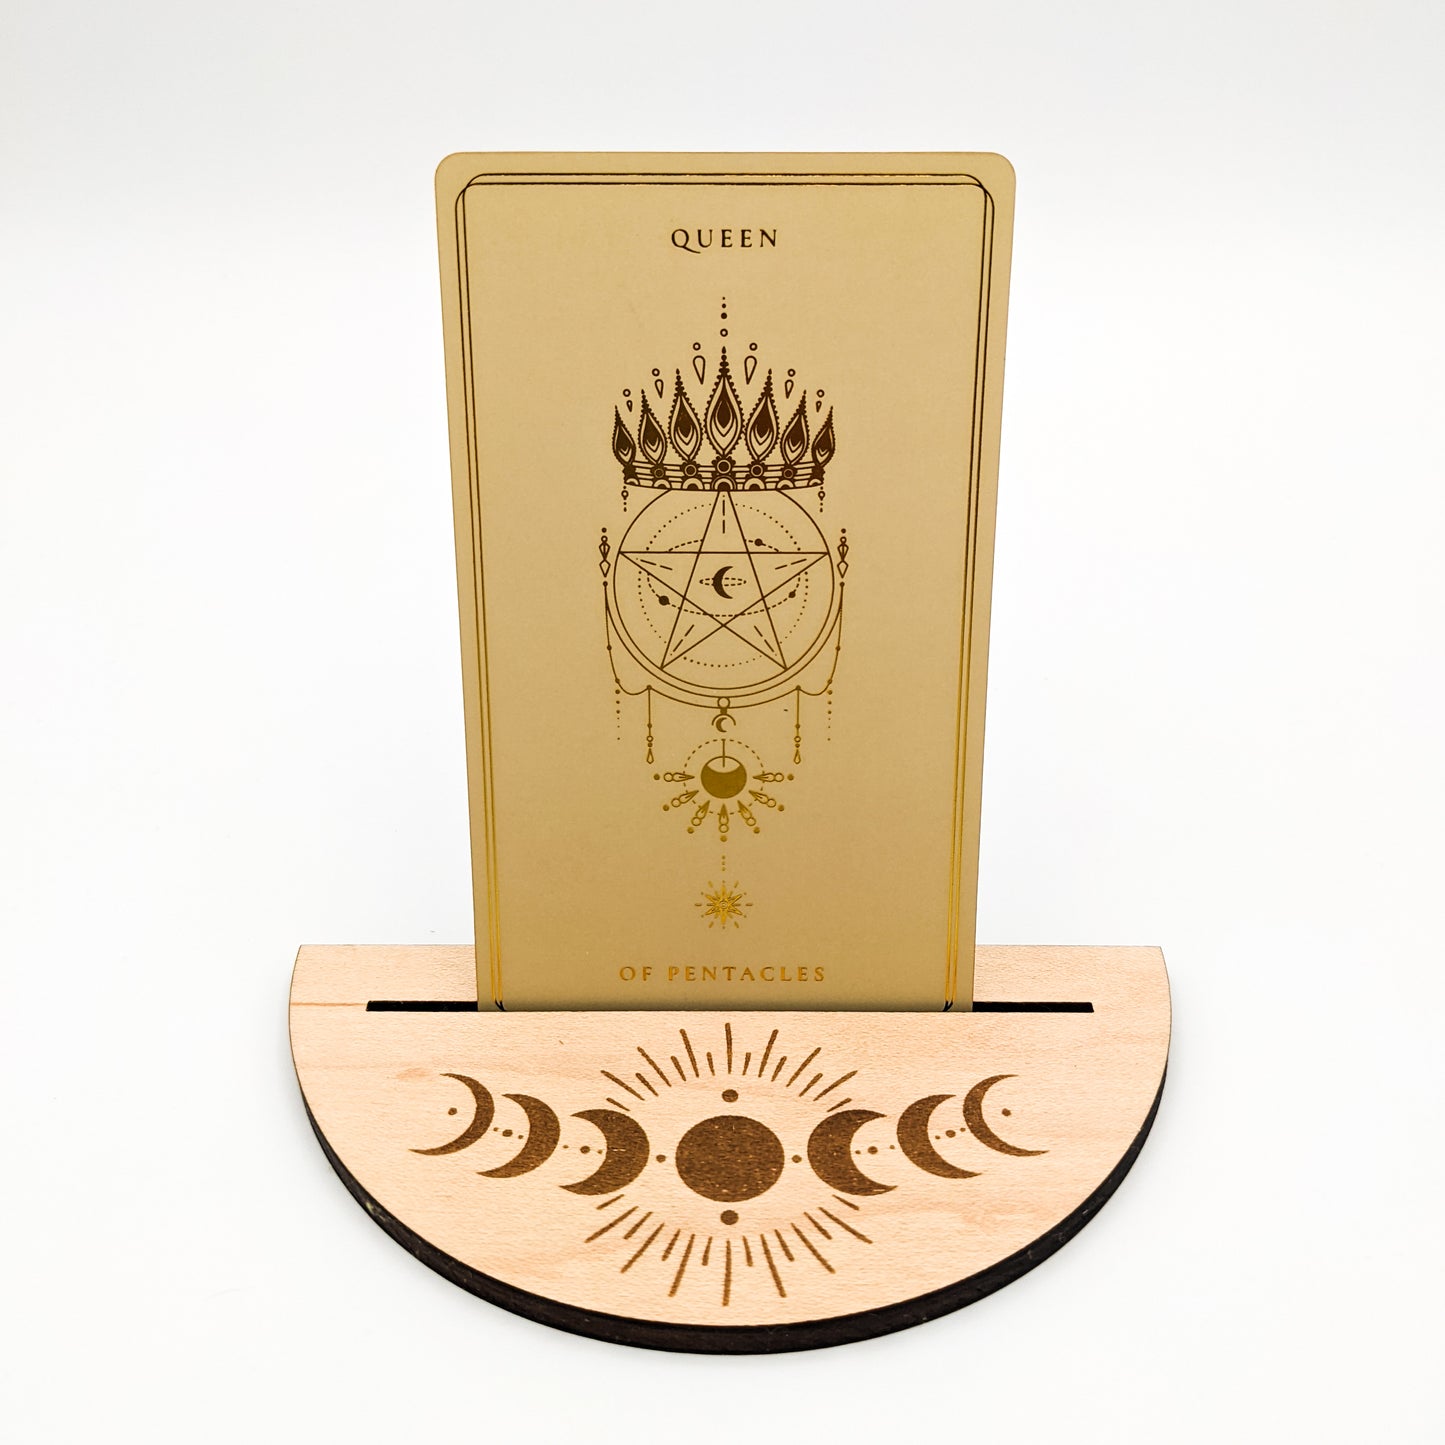 Mystic Moon Phase Tarot Card Stand